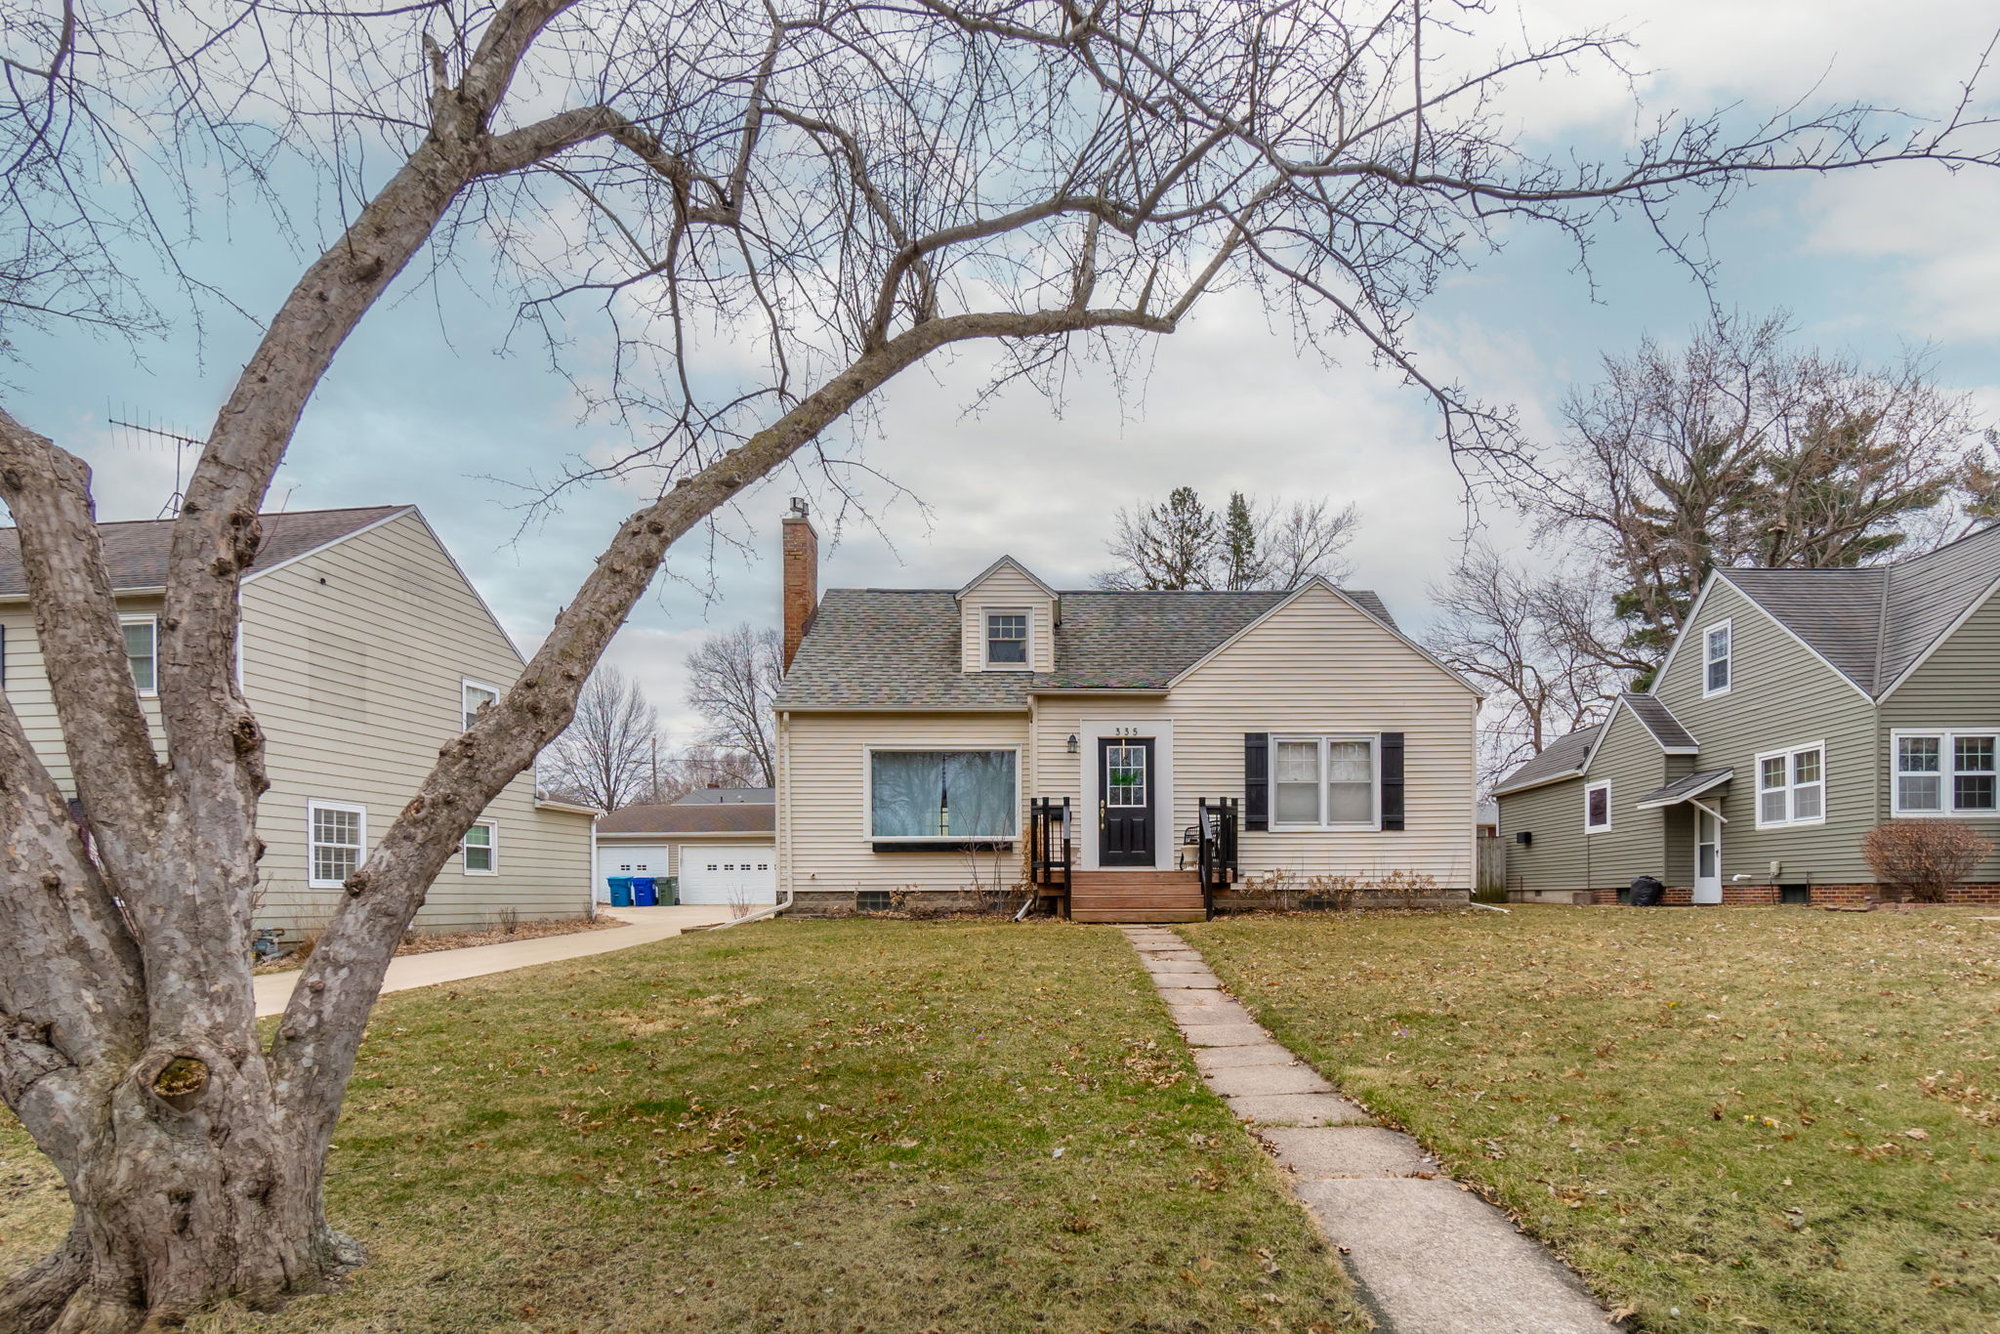 Check Out this Darling Derbyshire Home in Waterloo Iowa